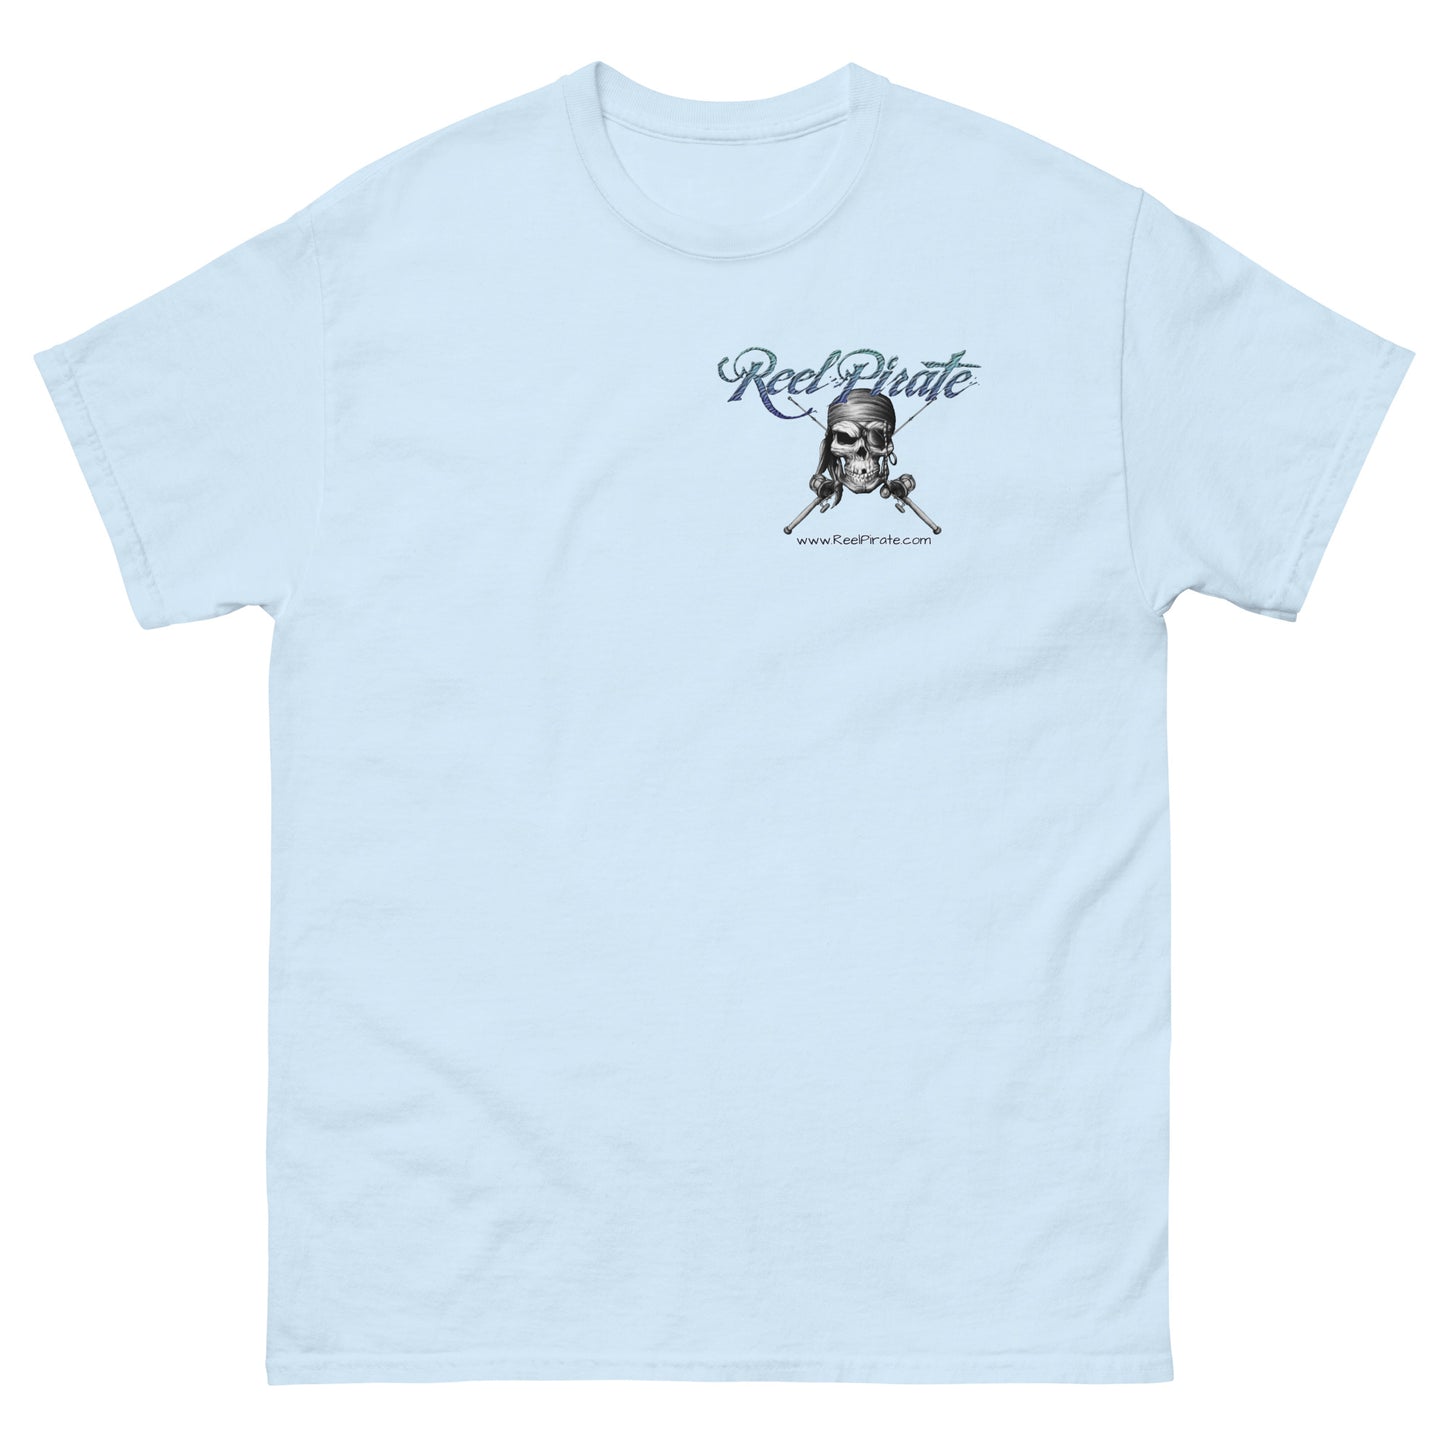 Men's REELPIRATE MACK ATTACK on back  classic tee